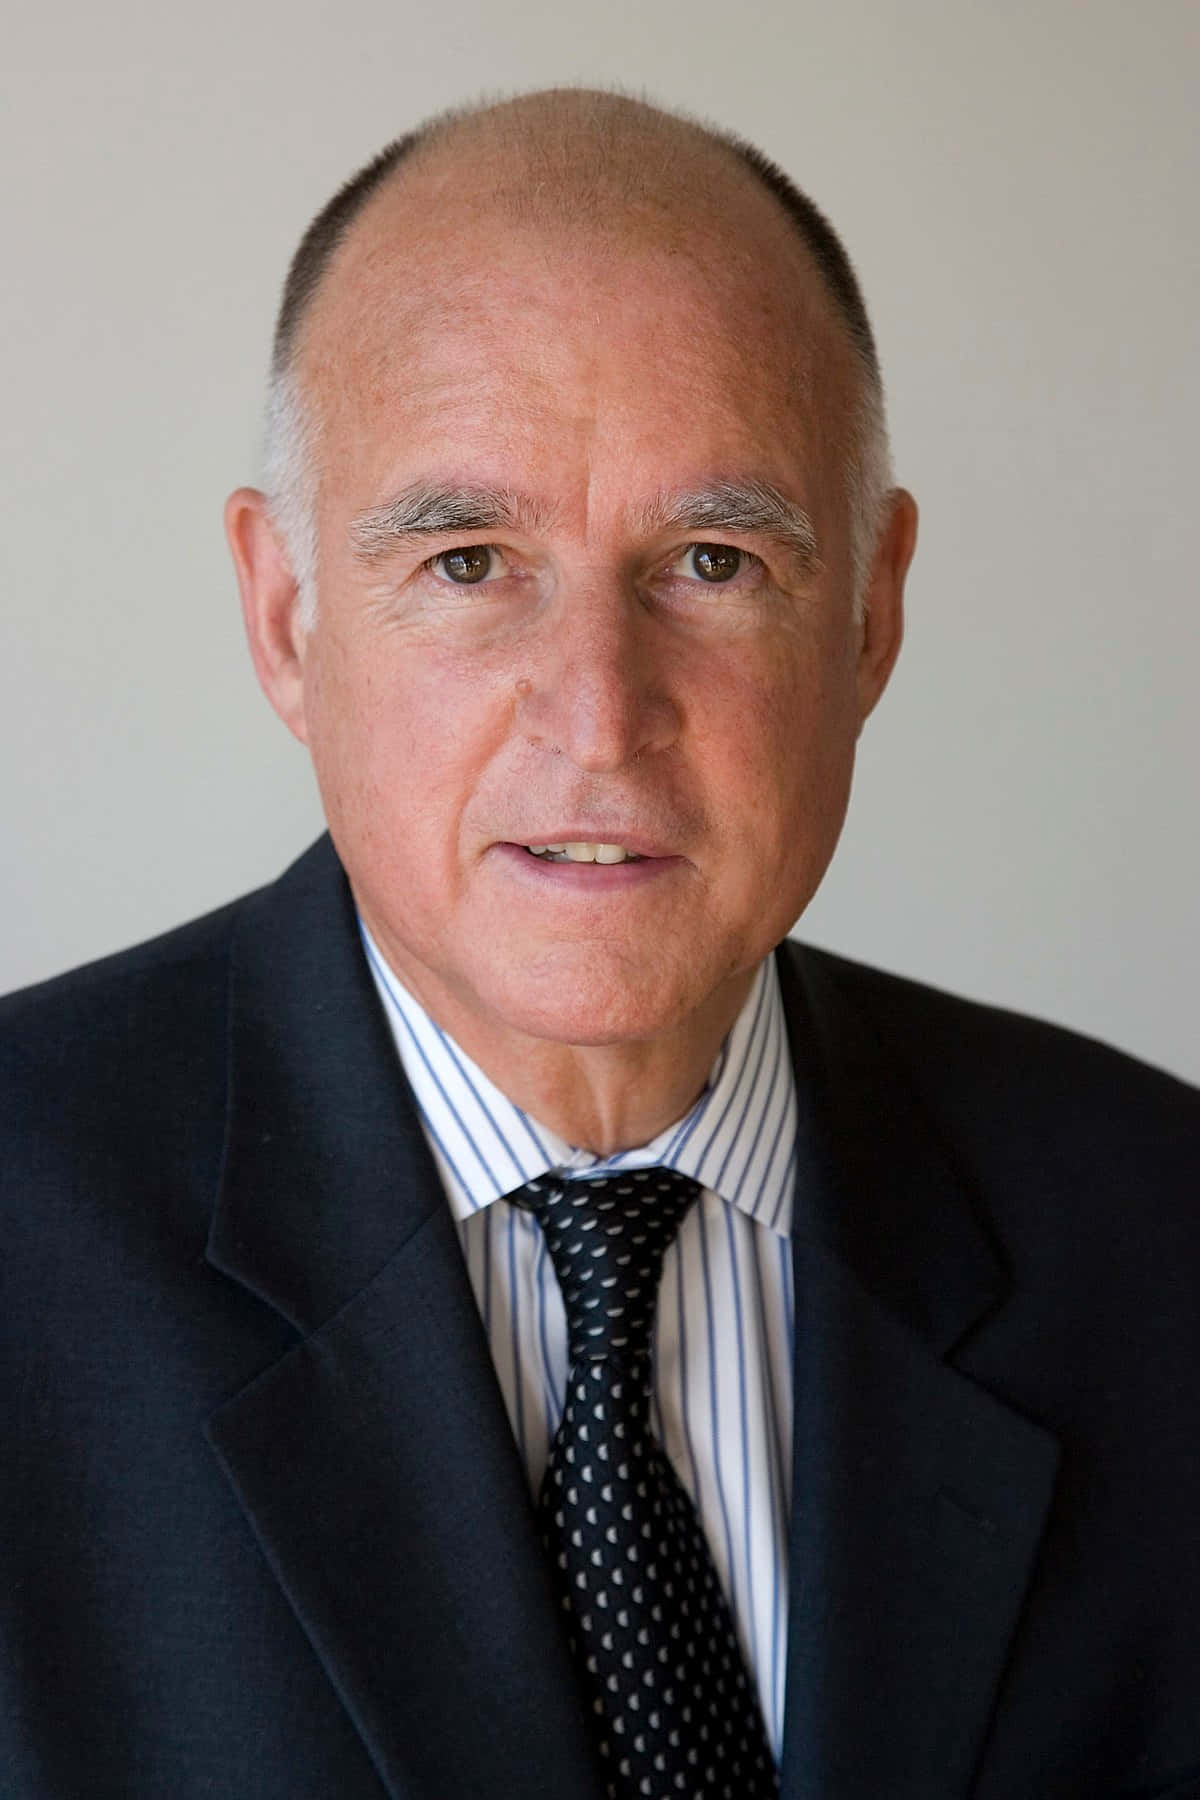 Former Governor of California Jerry Brown. Wallpaper